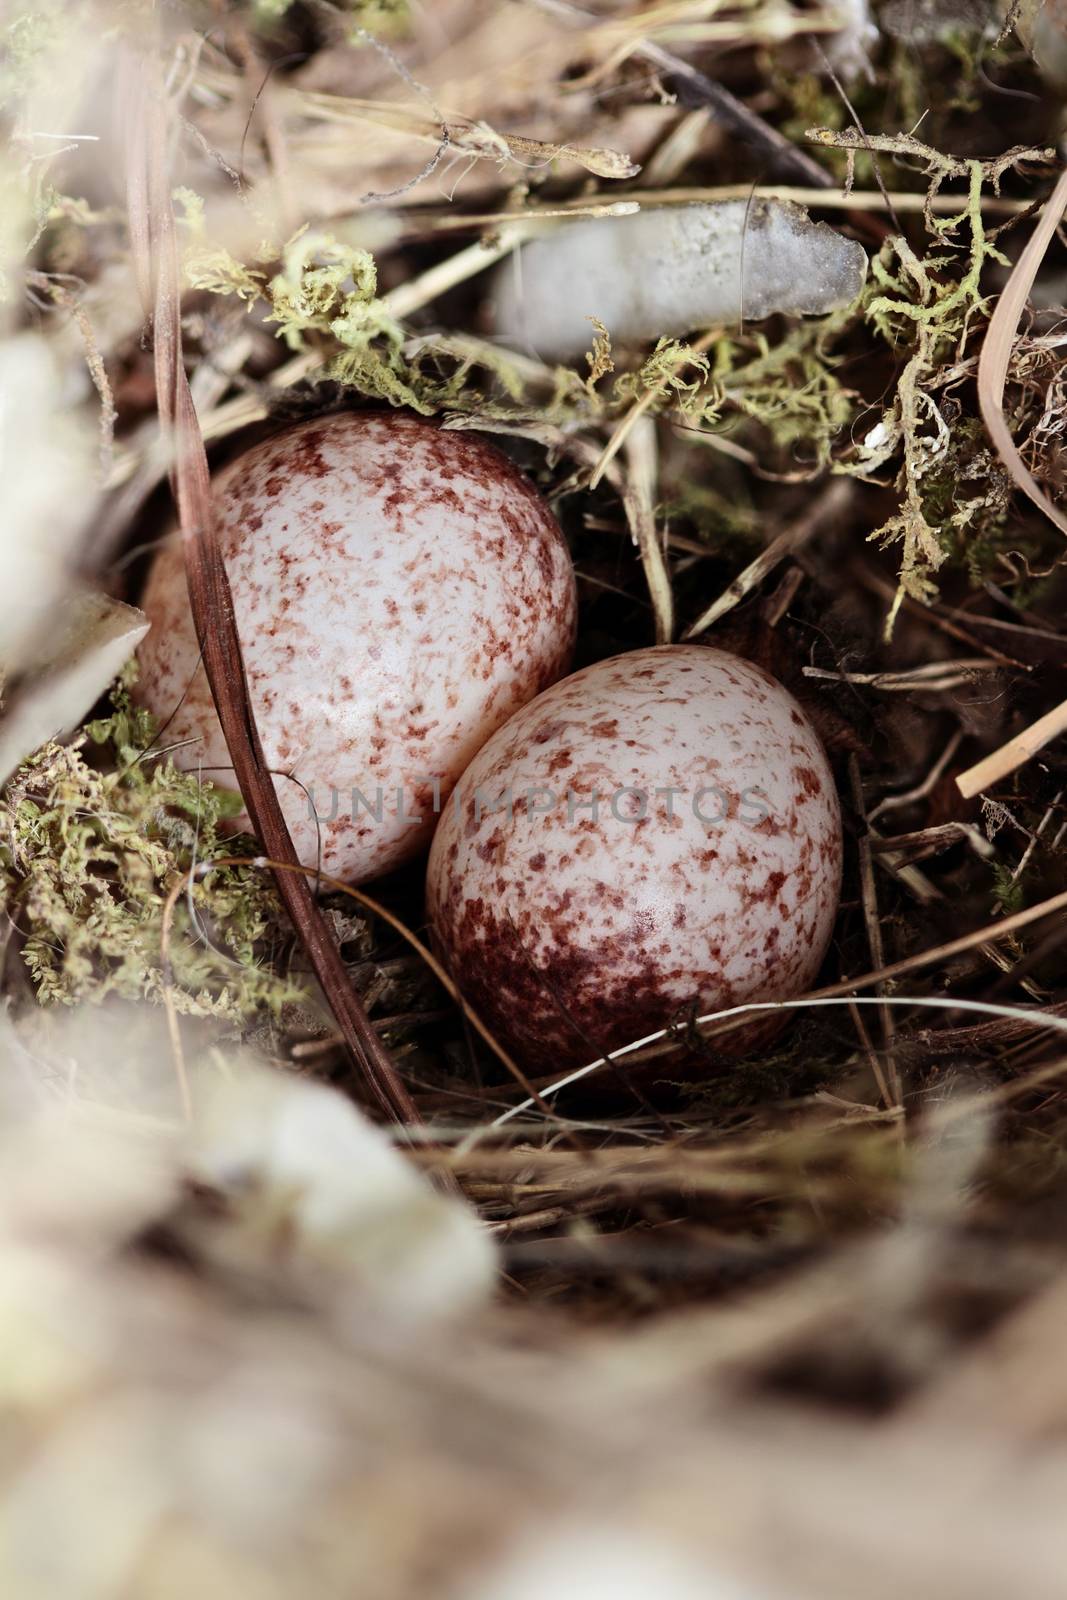 Wrens Nest with Eggs by StephanieFrey